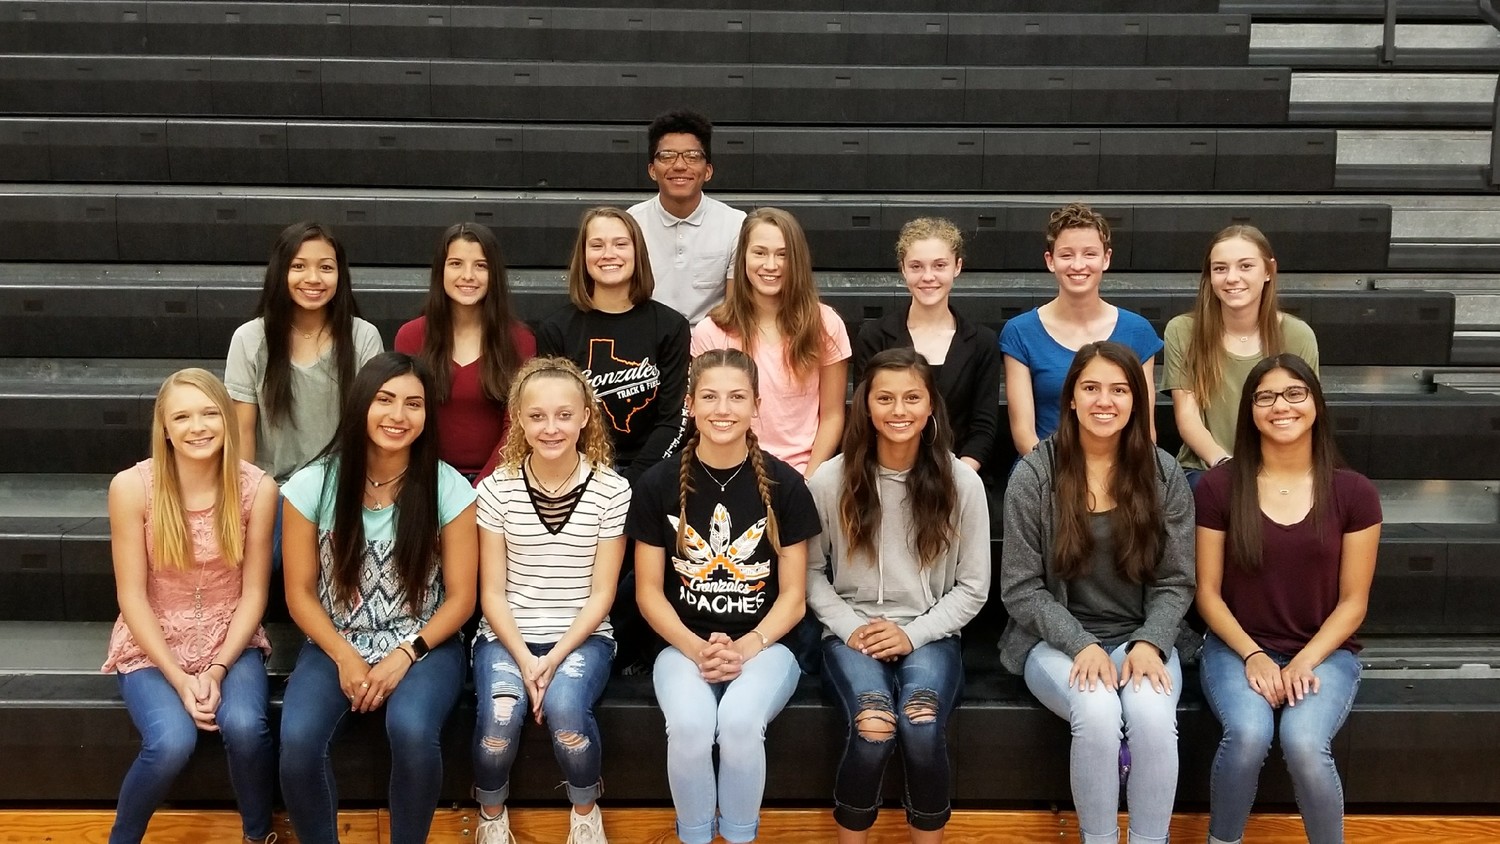 Pictured are 15 of the 16 athletes who qualified for the Texas Relays this upcoming weekend. Not pictured is Madison Singletary.